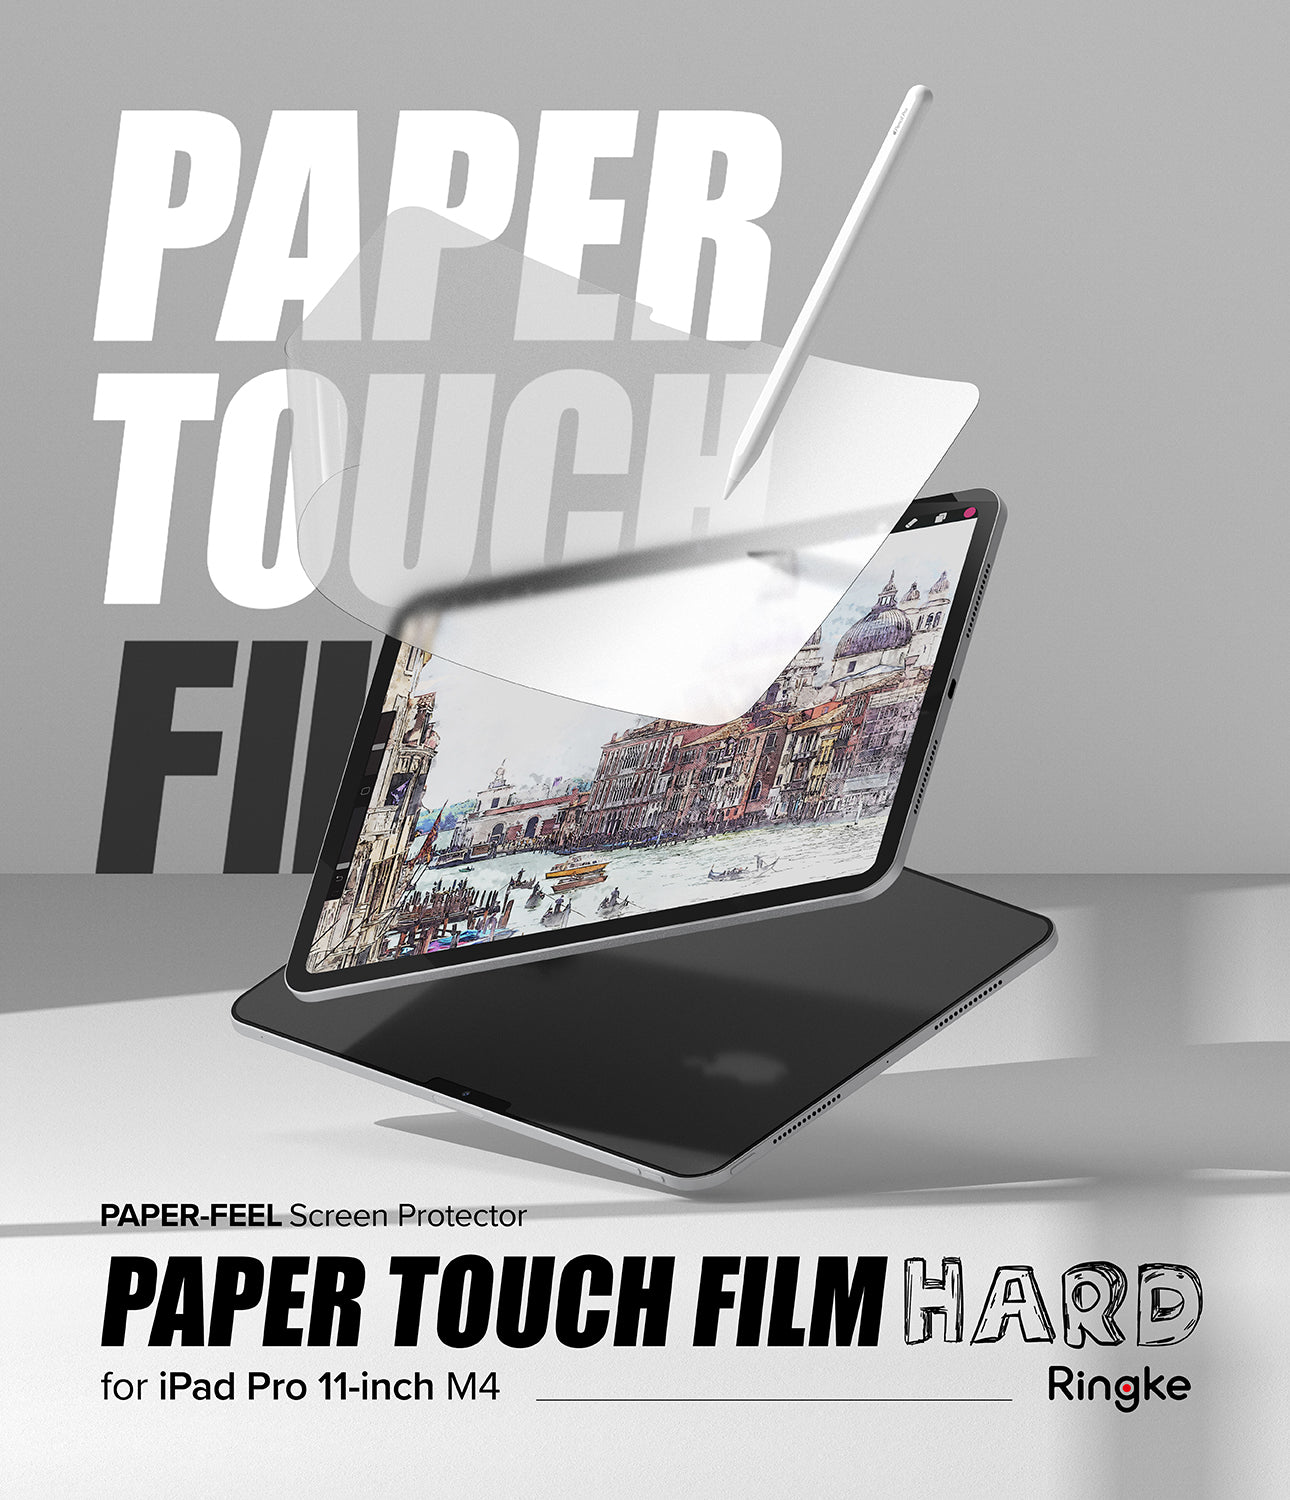 iPad Pro 11" (M4) Screen Protector | Paper Touch Film - Hard - By Ringke